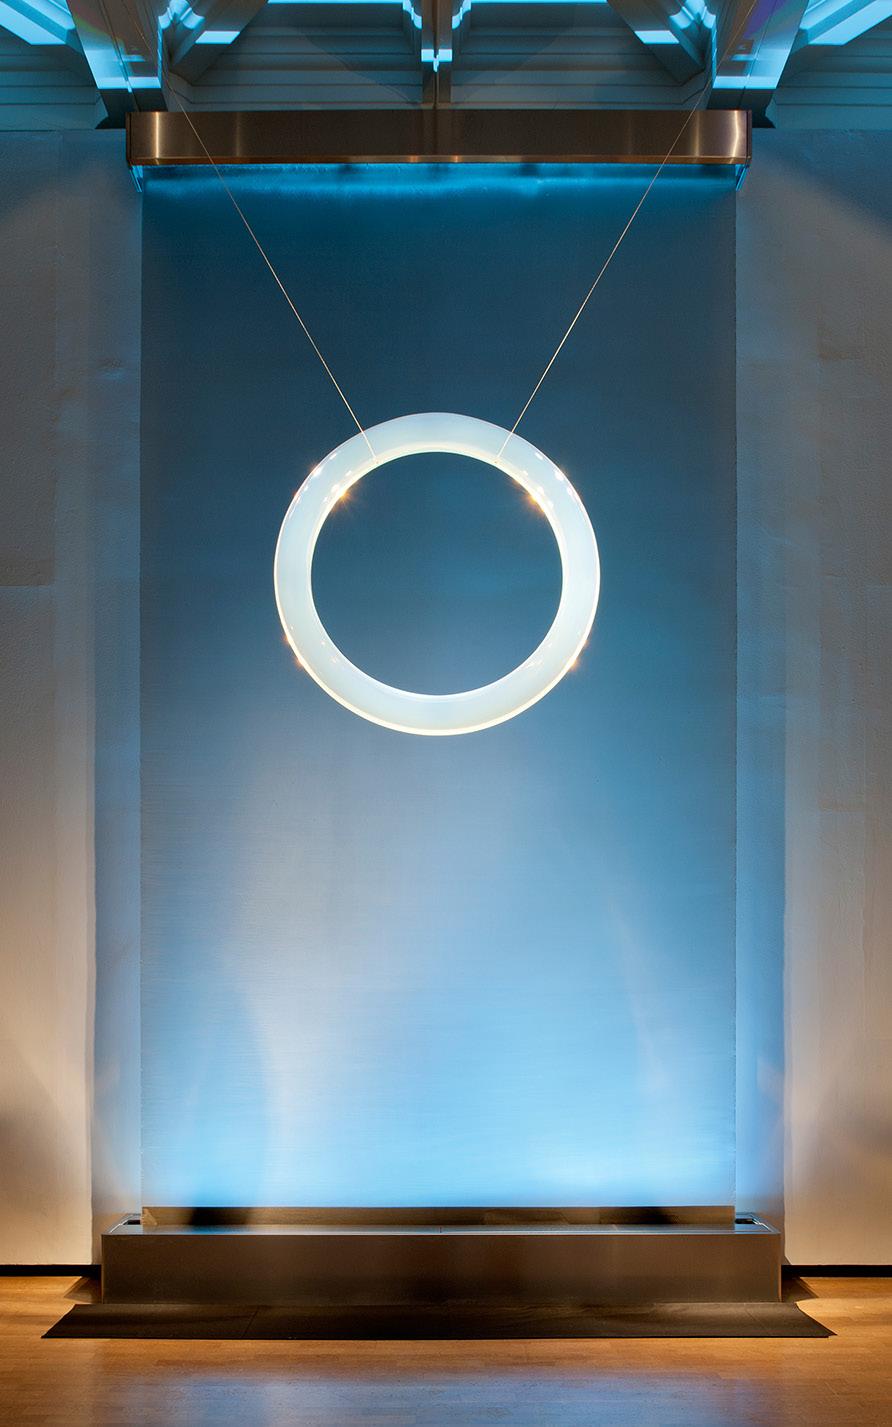 Mariko Mori, Ring: One with Nature The latest eco-minded project from the Japanese